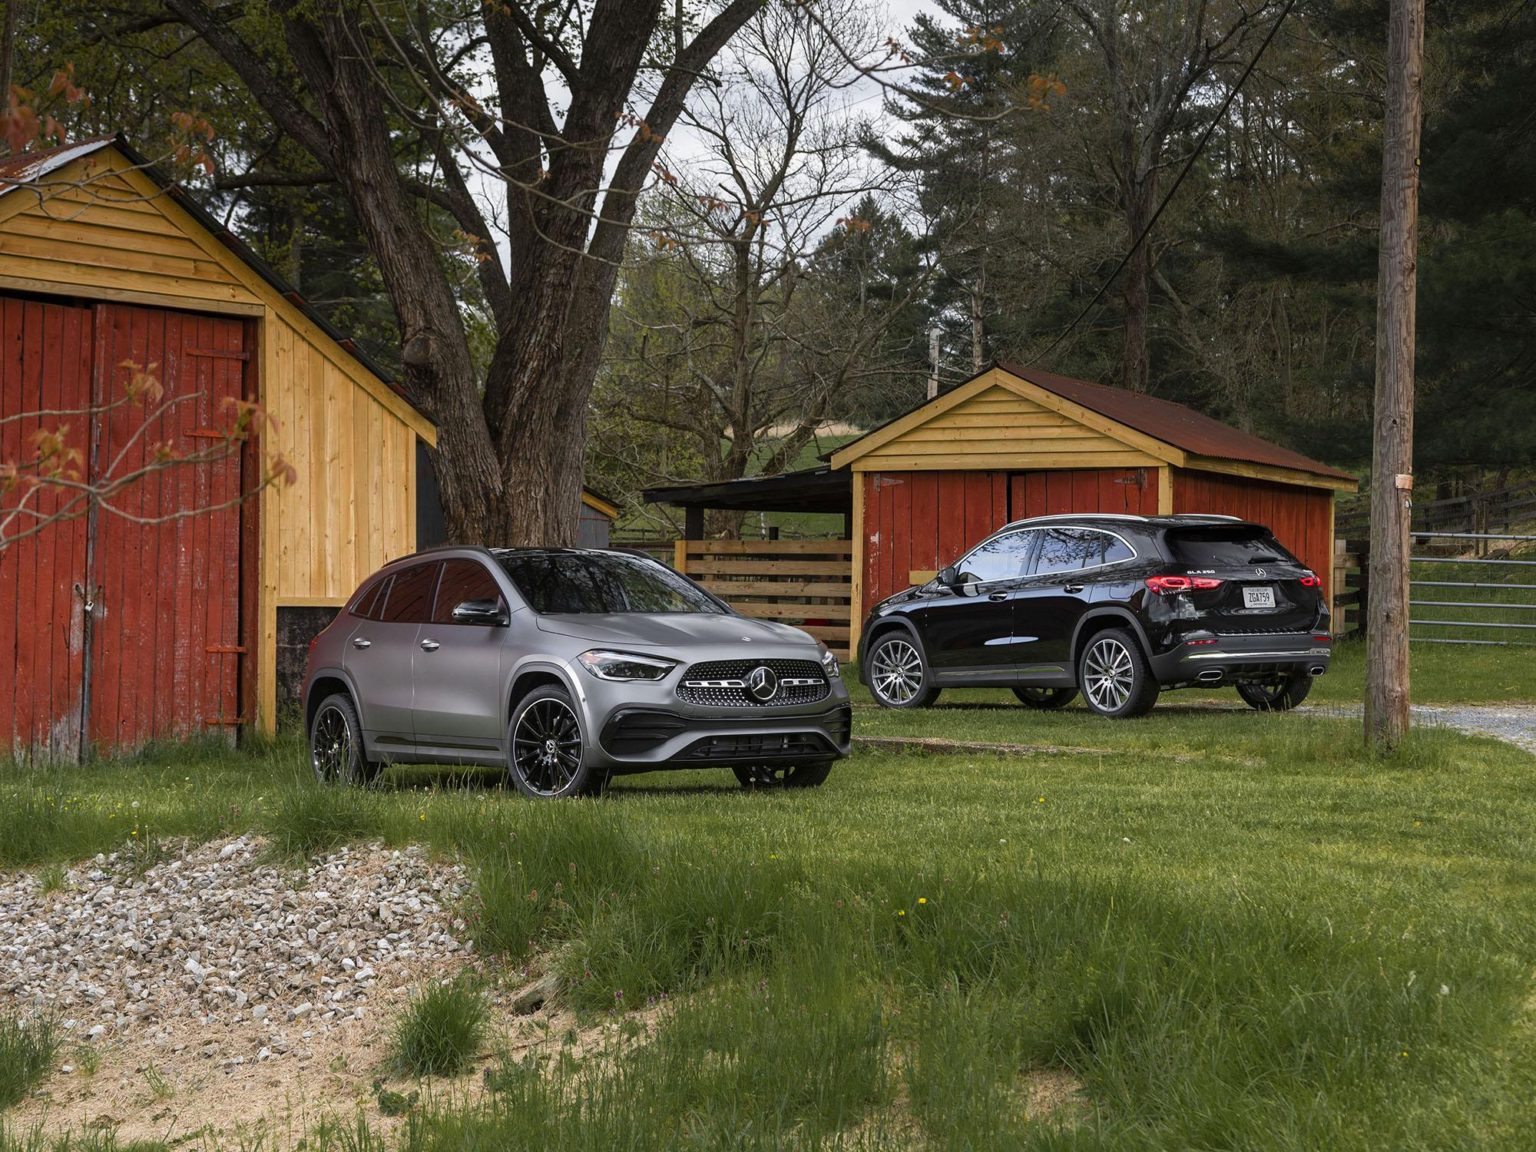 The Mercedes-Benz GLA was redesigned for the 2021 model year.